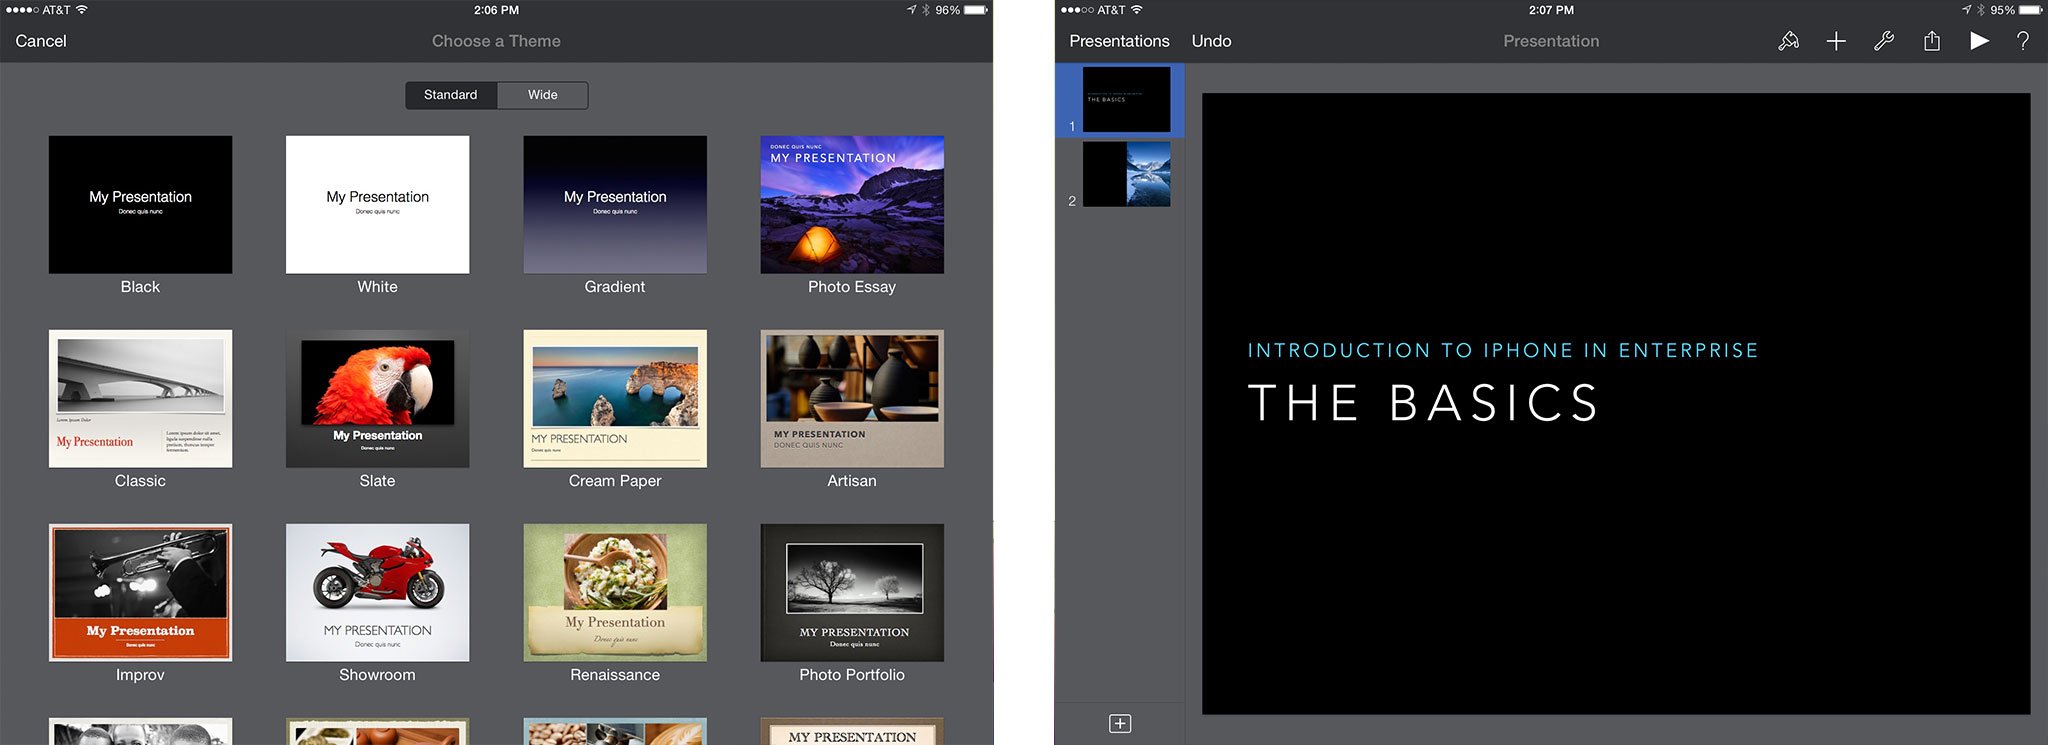 best app for presentations on ipad